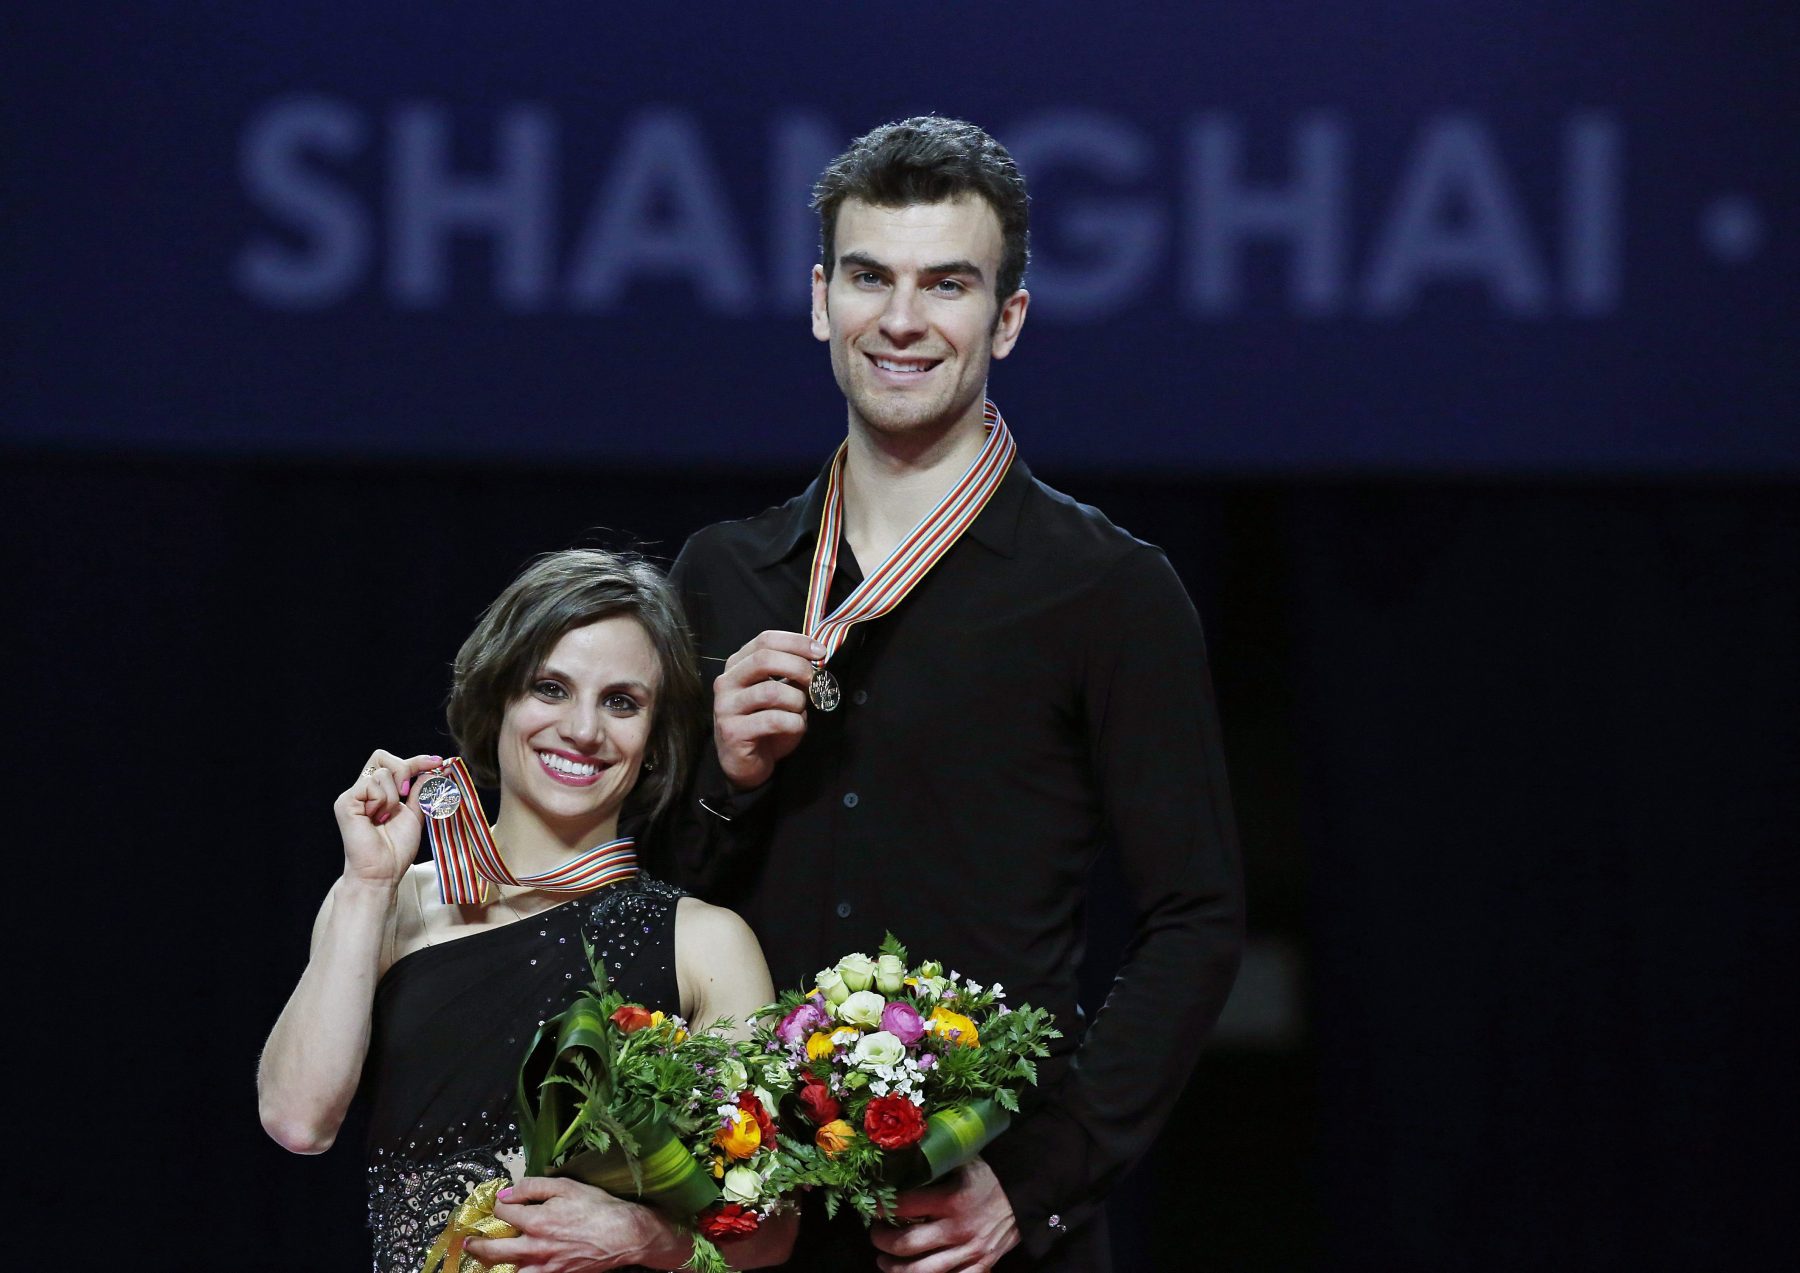 Meagan Duhamel and Eric Radford with their gold medals from the 2015 World Championships